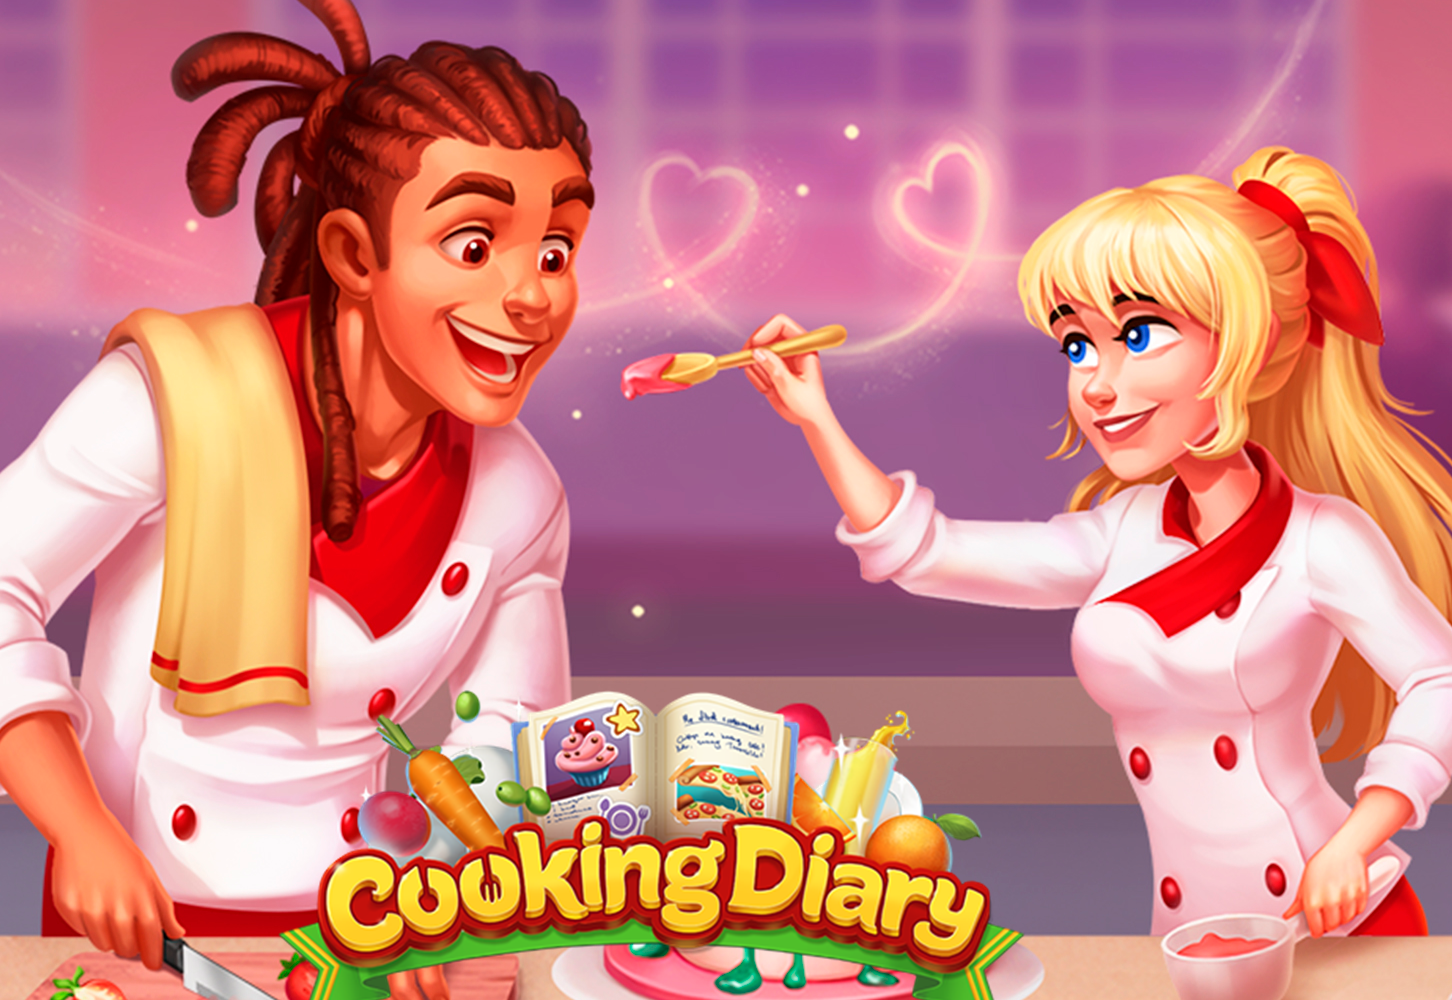 Enjoy the world most popular cooking game with you friends now!